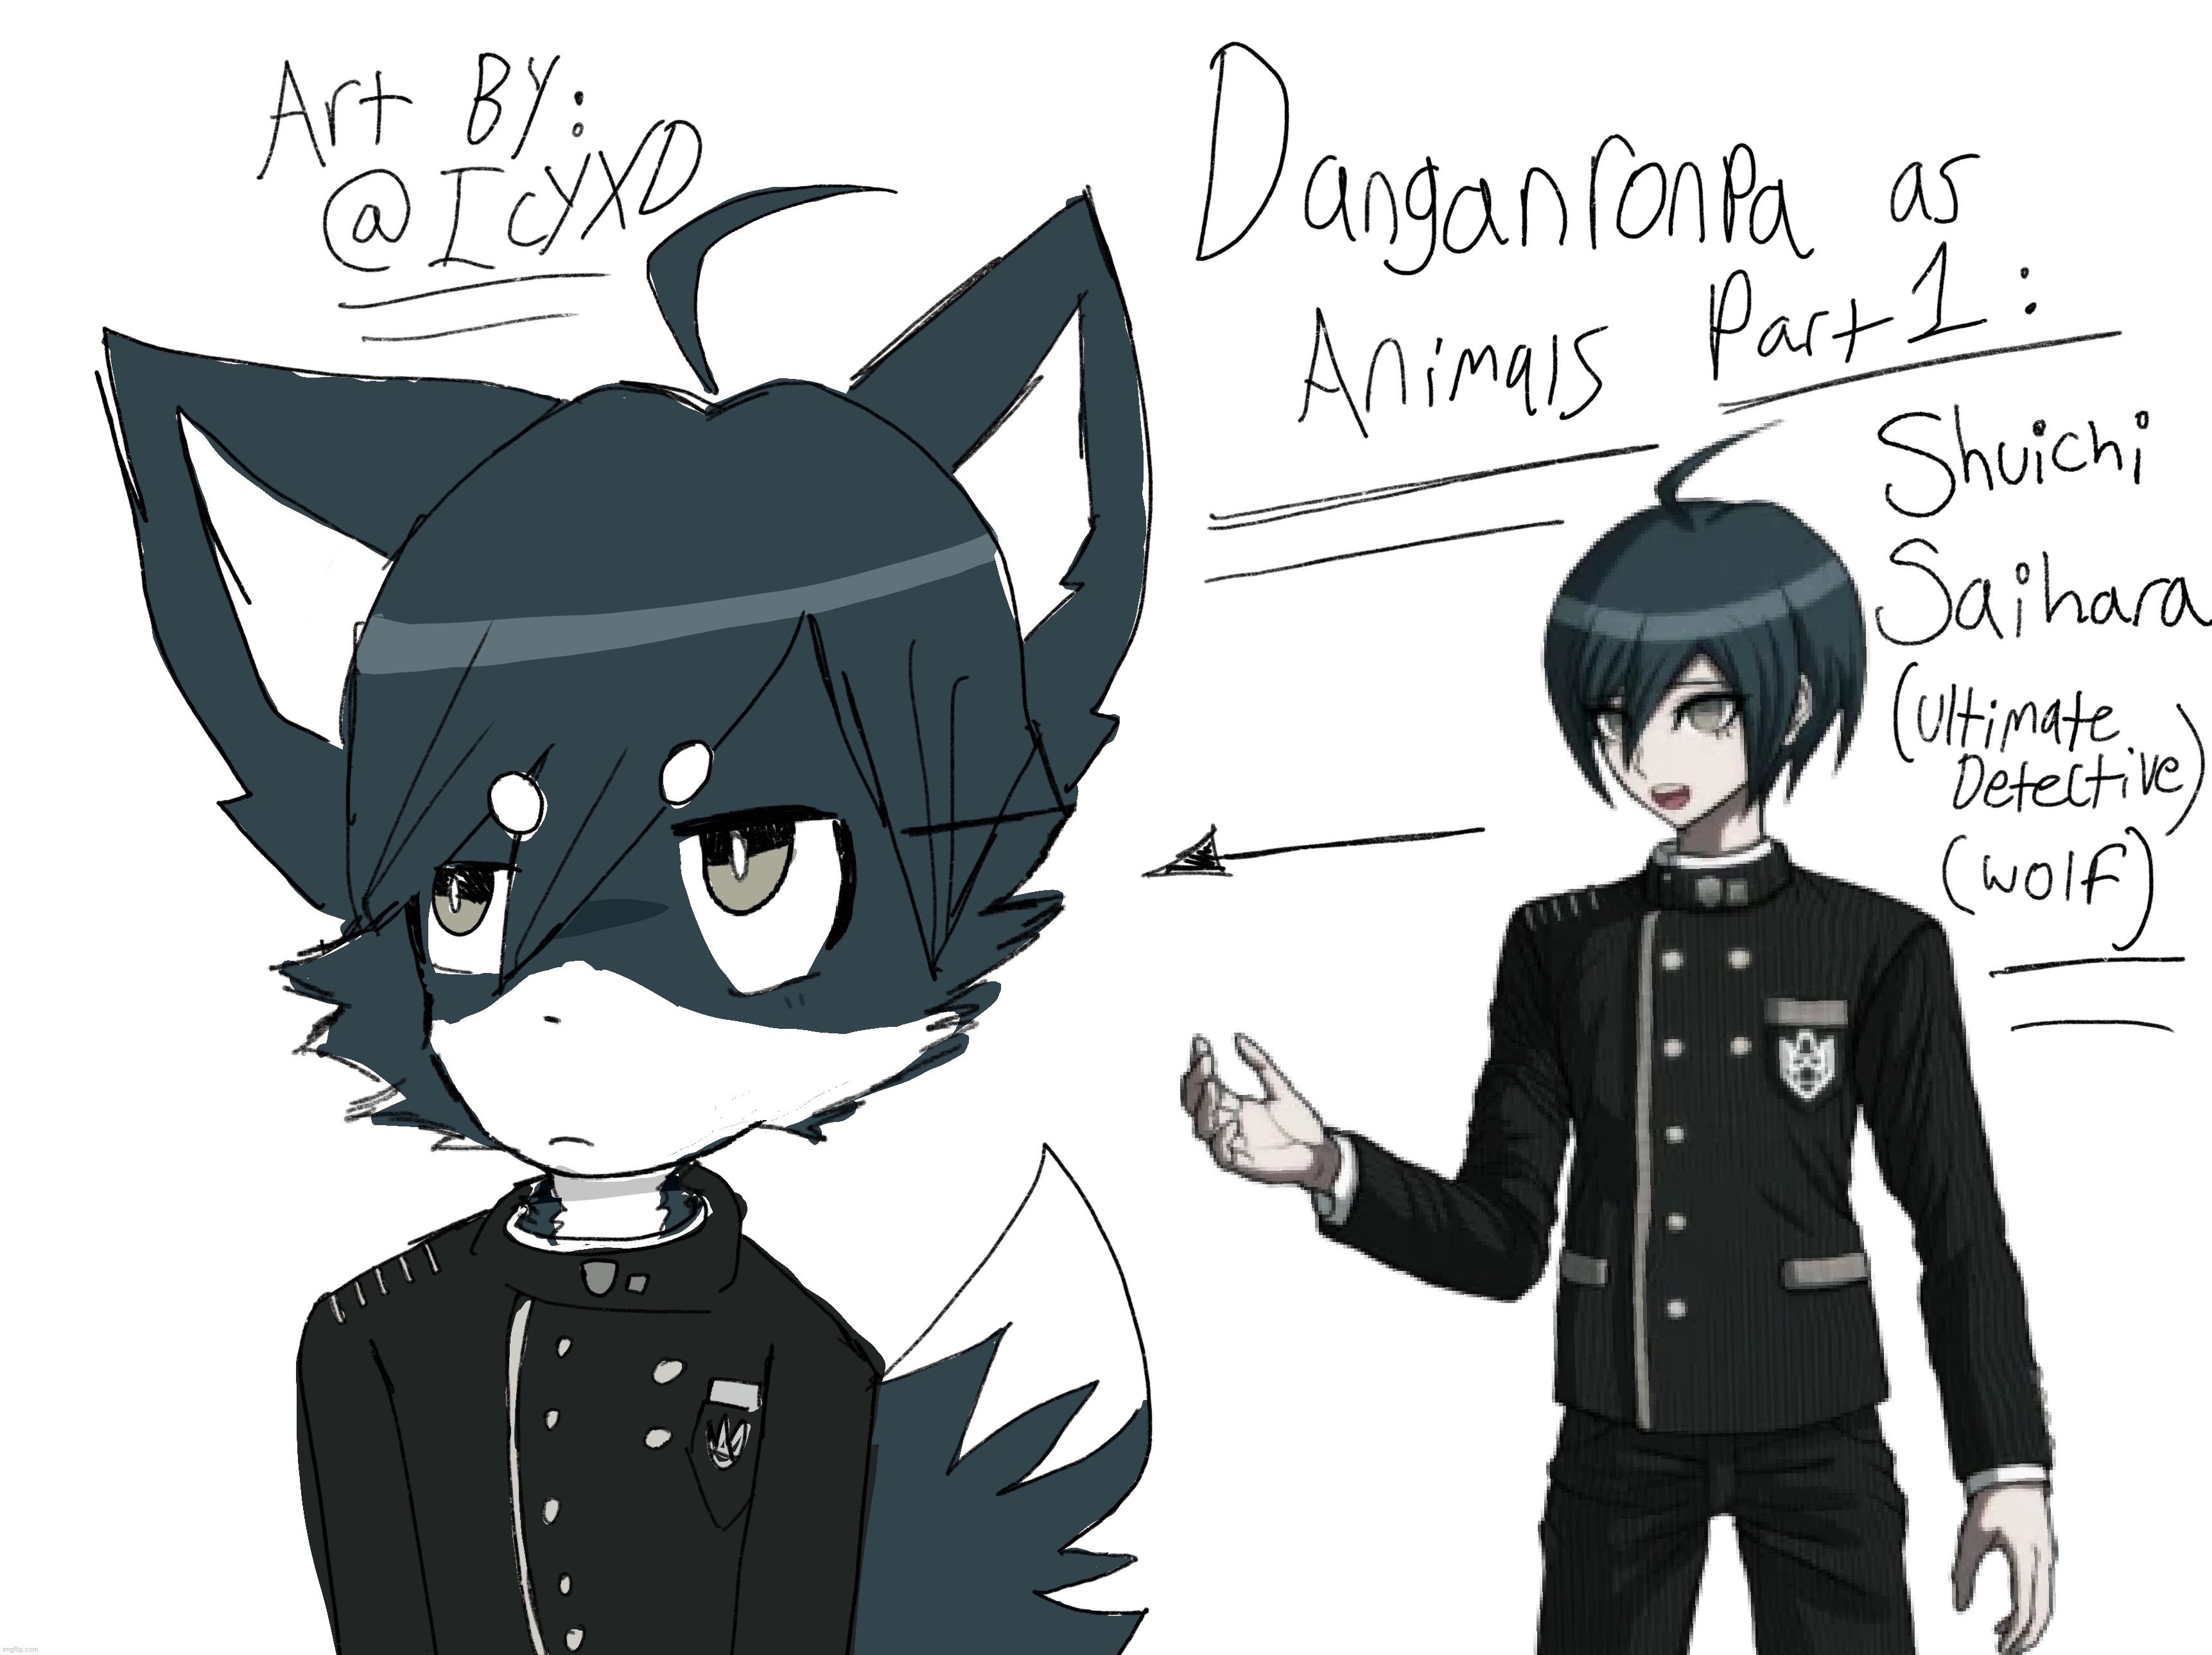 He can sniff out clues lol | image tagged in danganronpa,shuichi saihara,furry,wolf | made w/ Imgflip meme maker